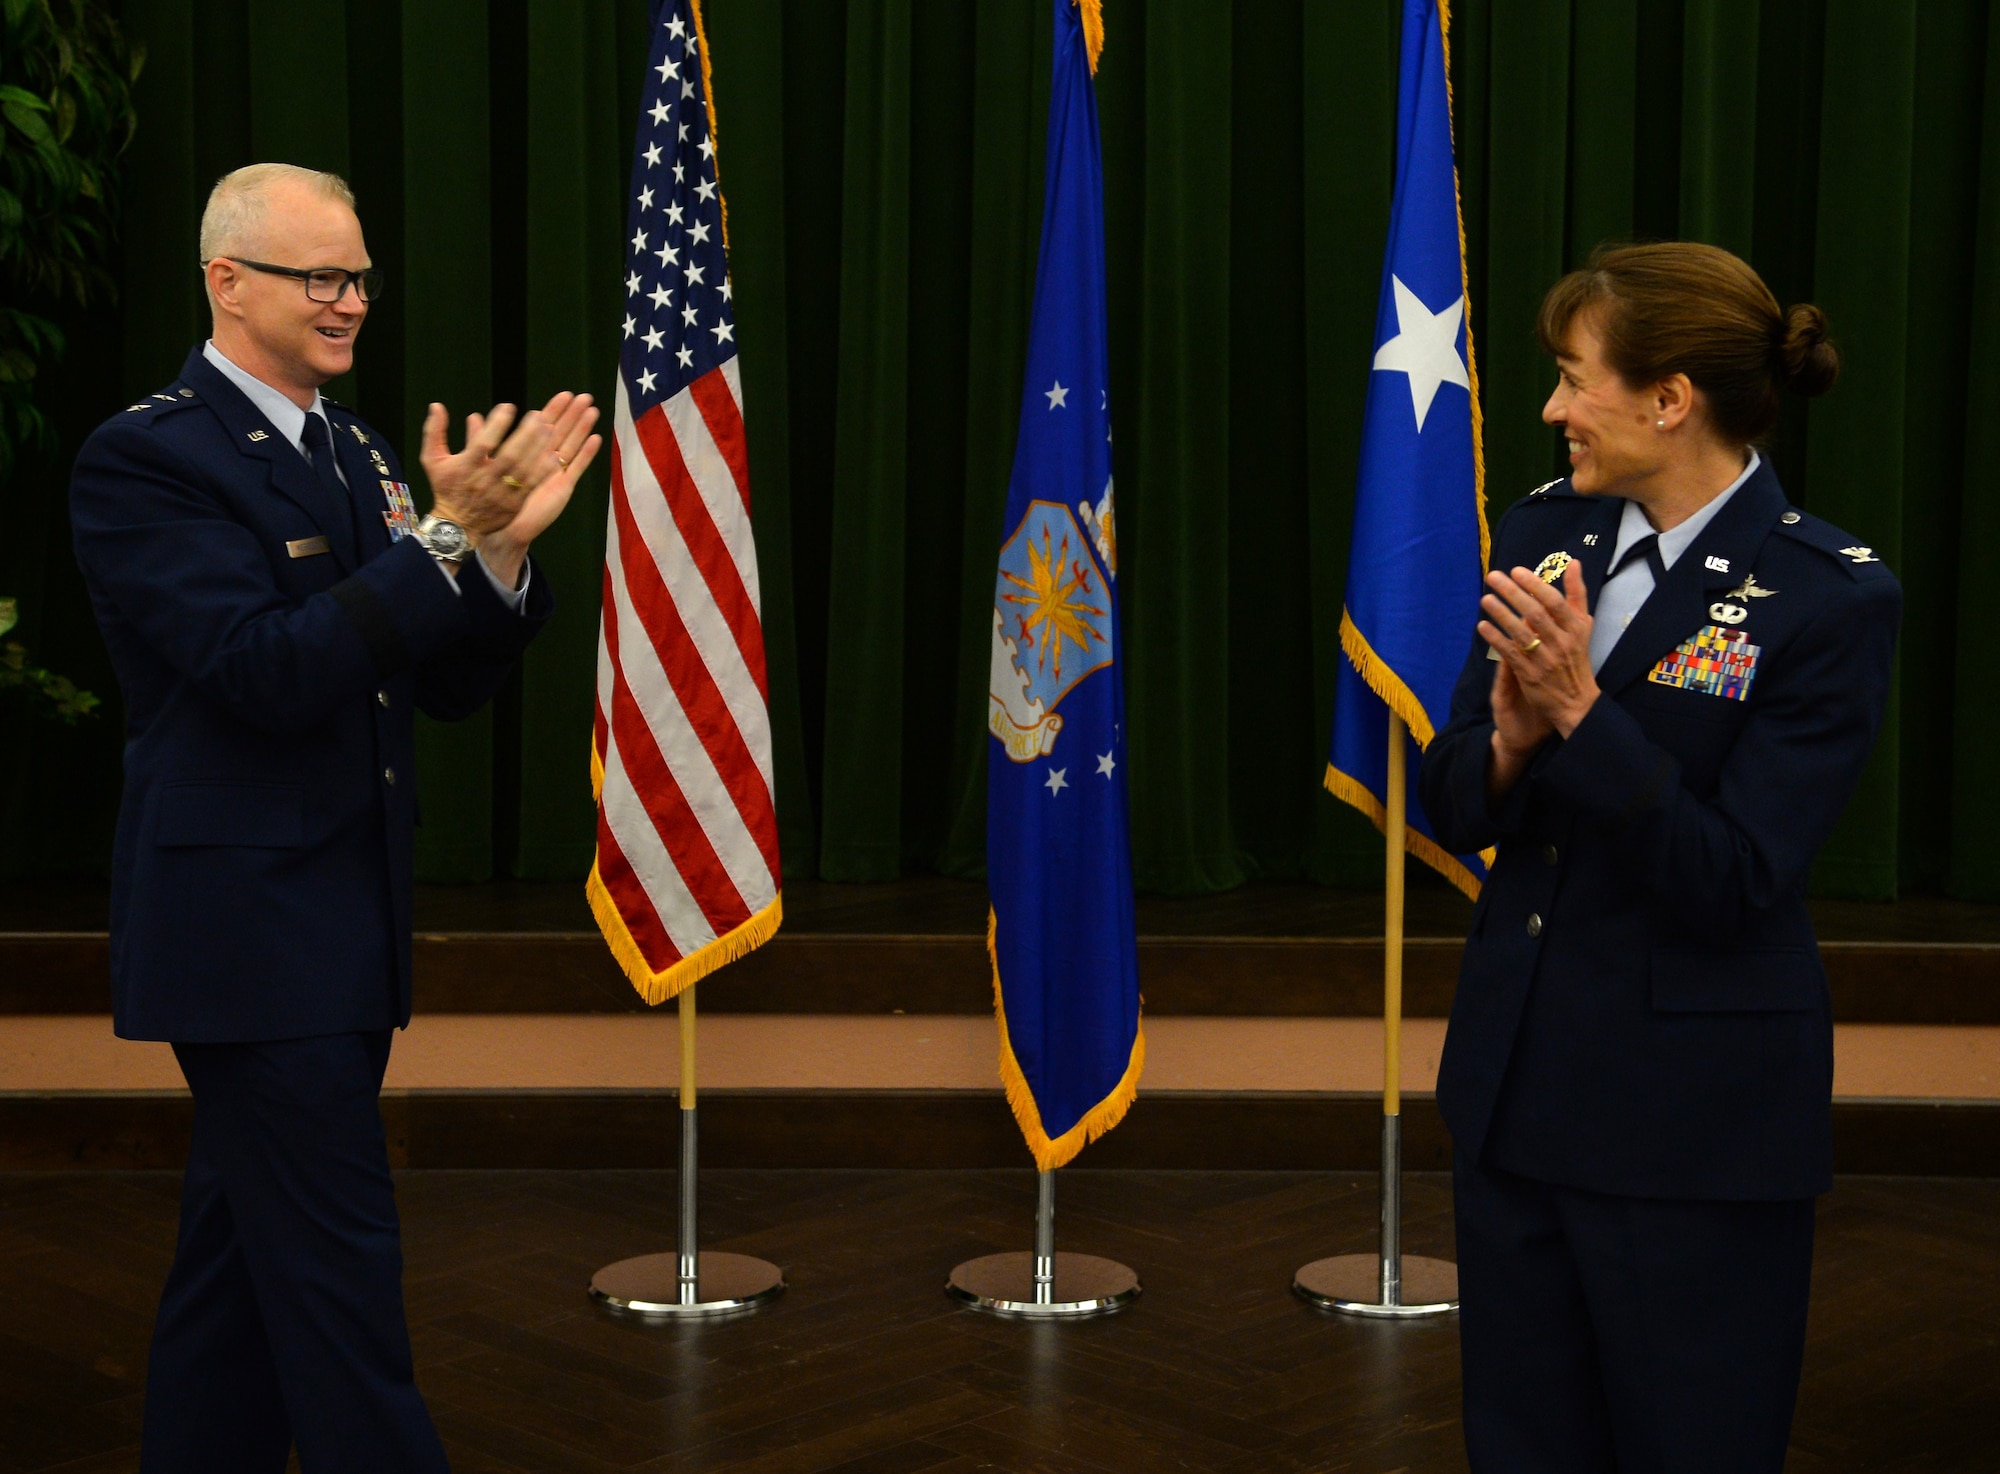 Maj. Gen. Chris Weggeman, Air Forces Cyber commander, congratulates Col. Melissa Cunningham, new 67th Cyberspace Wing commander, during the wing’s change of command ceremony at Joint Base San Antonio-Lackland, Texas, June 20, 2018. Col. Bradley Pyburn relinquished command of the wing to Cunningham. (U.S. Air Force photo by Tech. Sgt. R.J. Biermann)